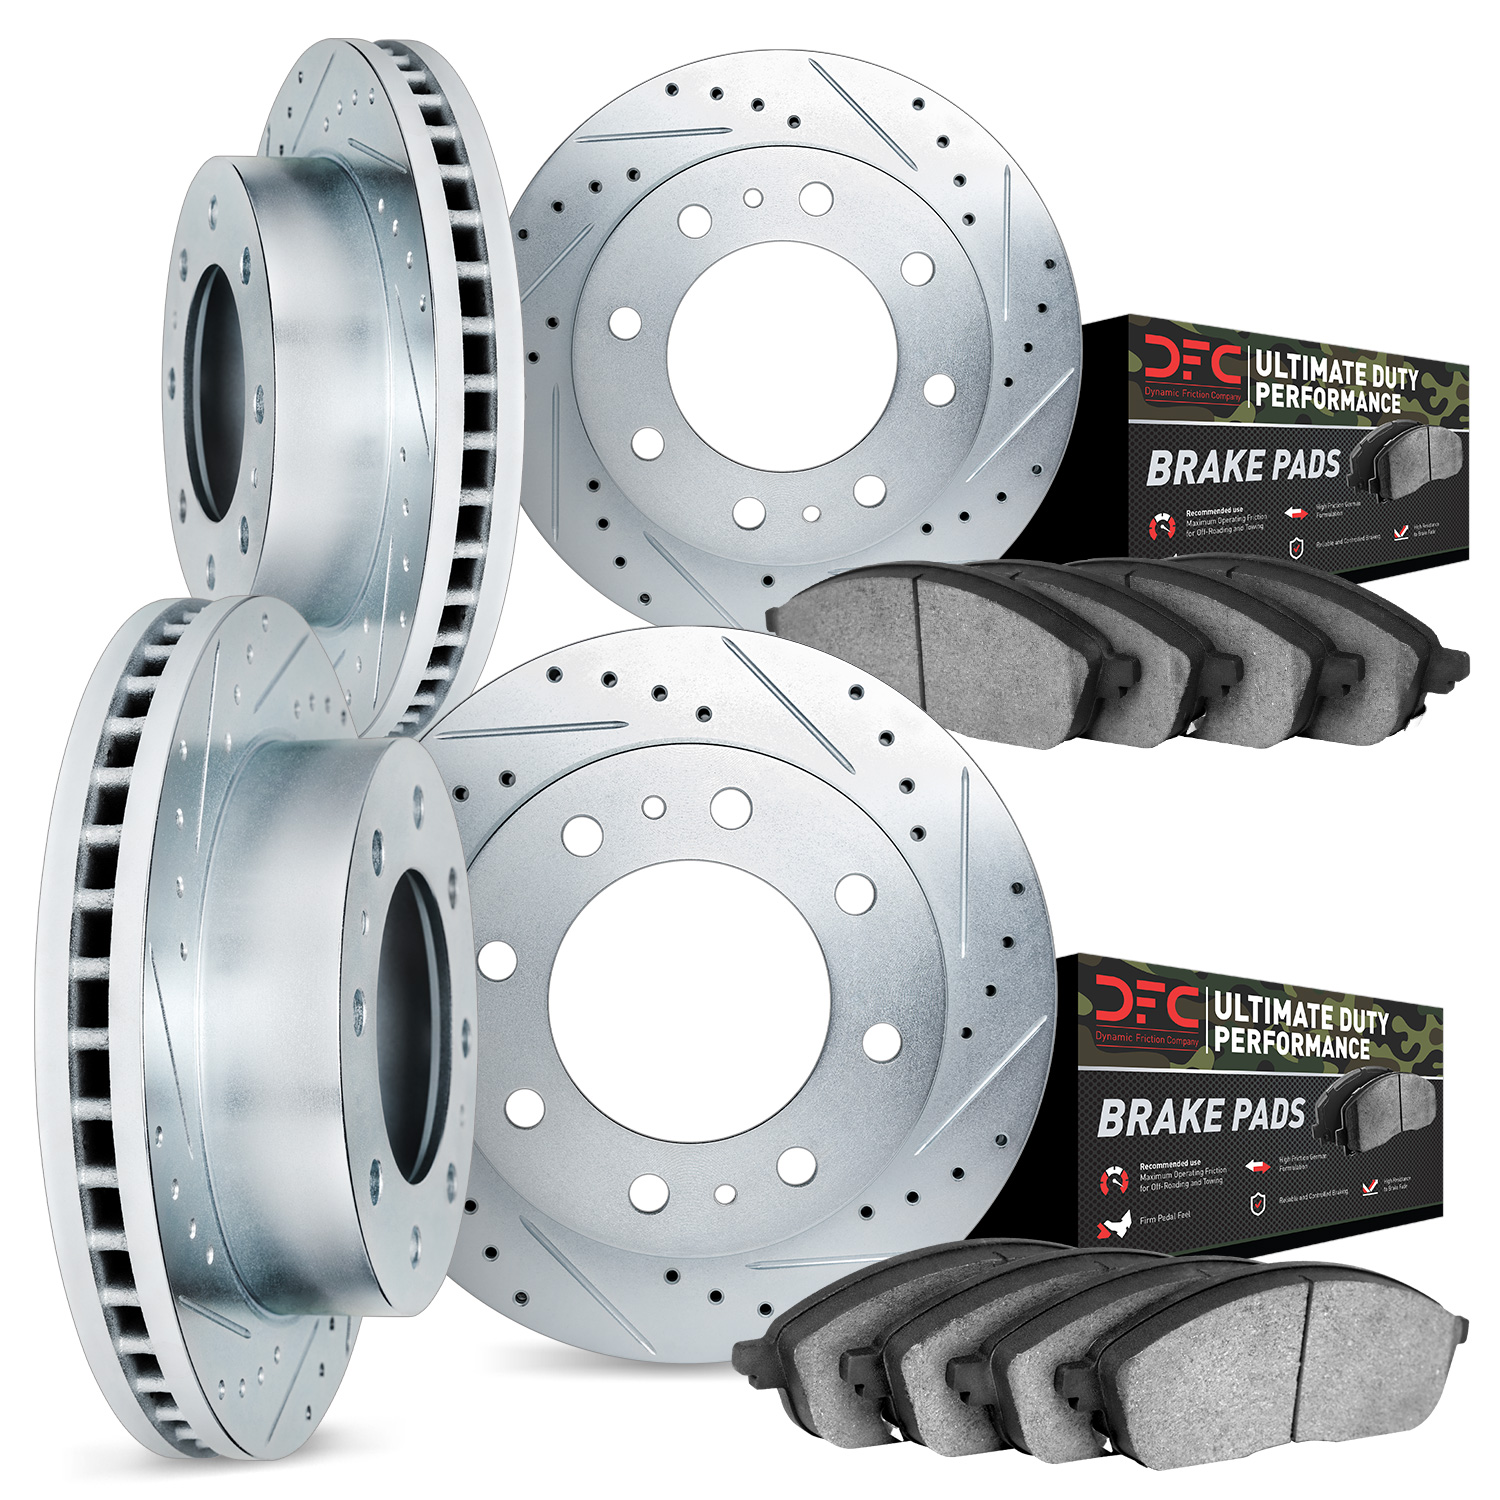 7404-54043 Drilled/Slotted Brake Rotors with Ultimate-Duty Brake Pads Kit [Silver], 2005-2007 Ford/Lincoln/Mercury/Mazda, Positi